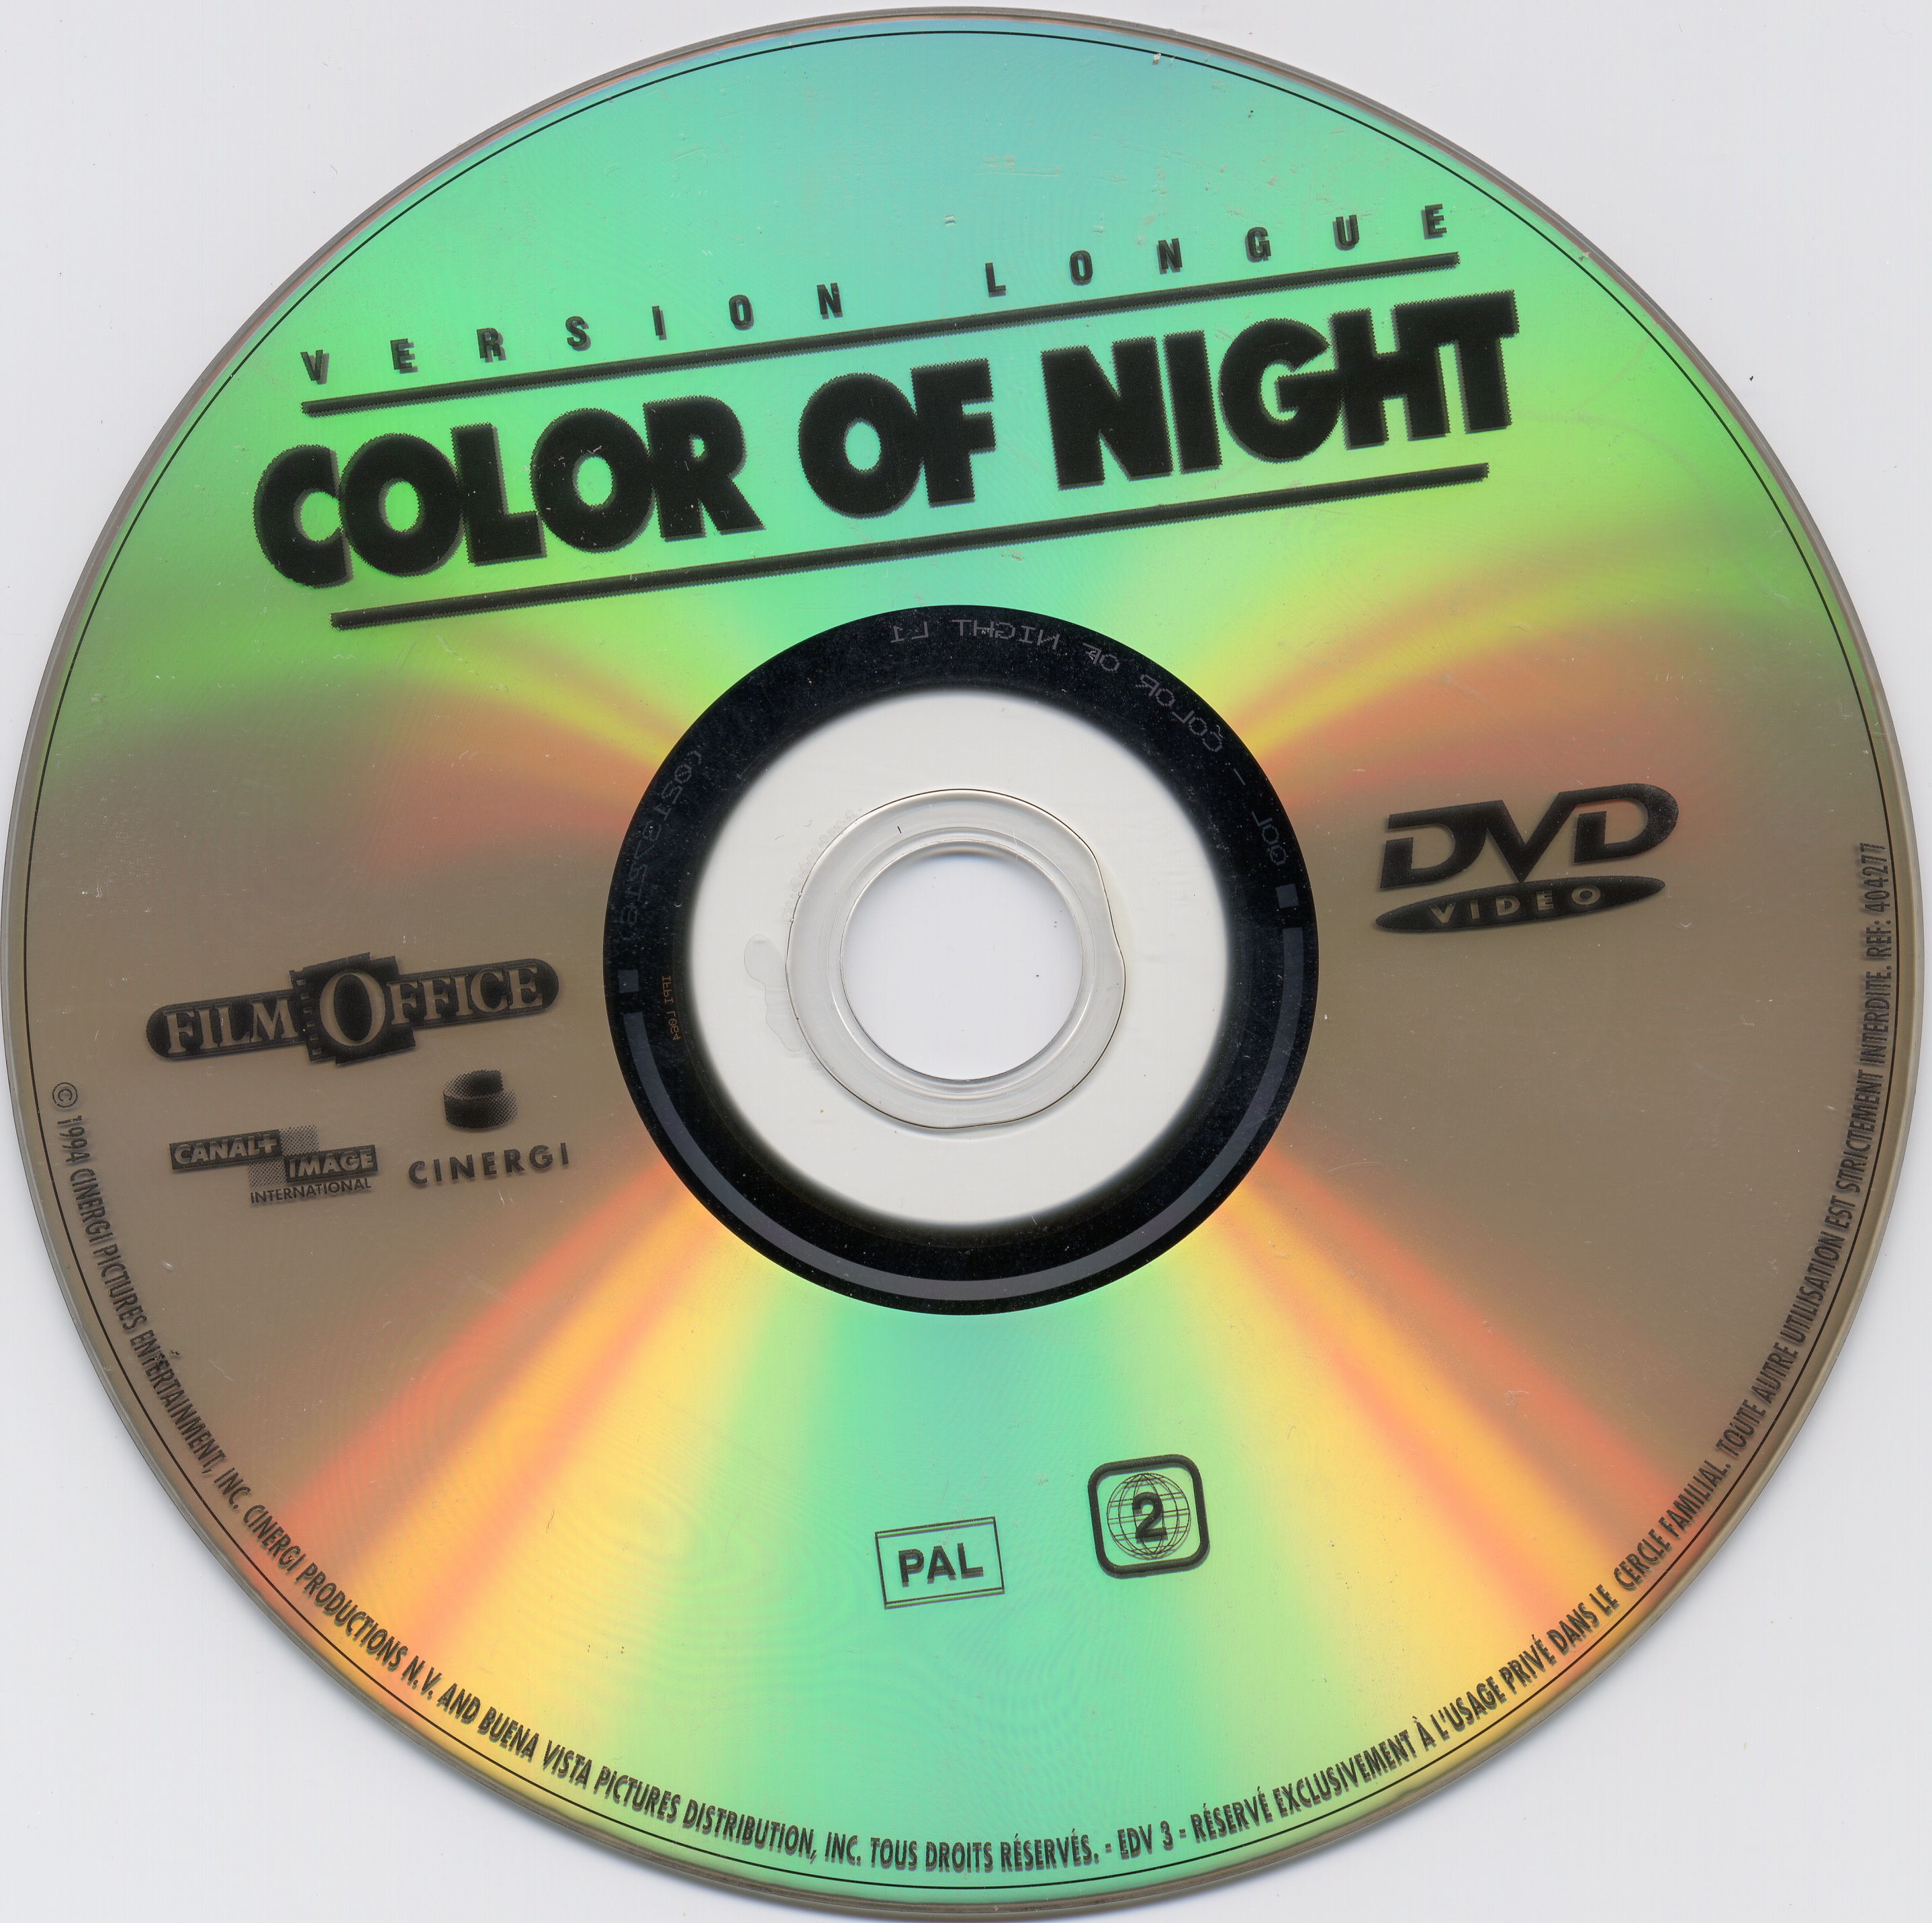 Color of night